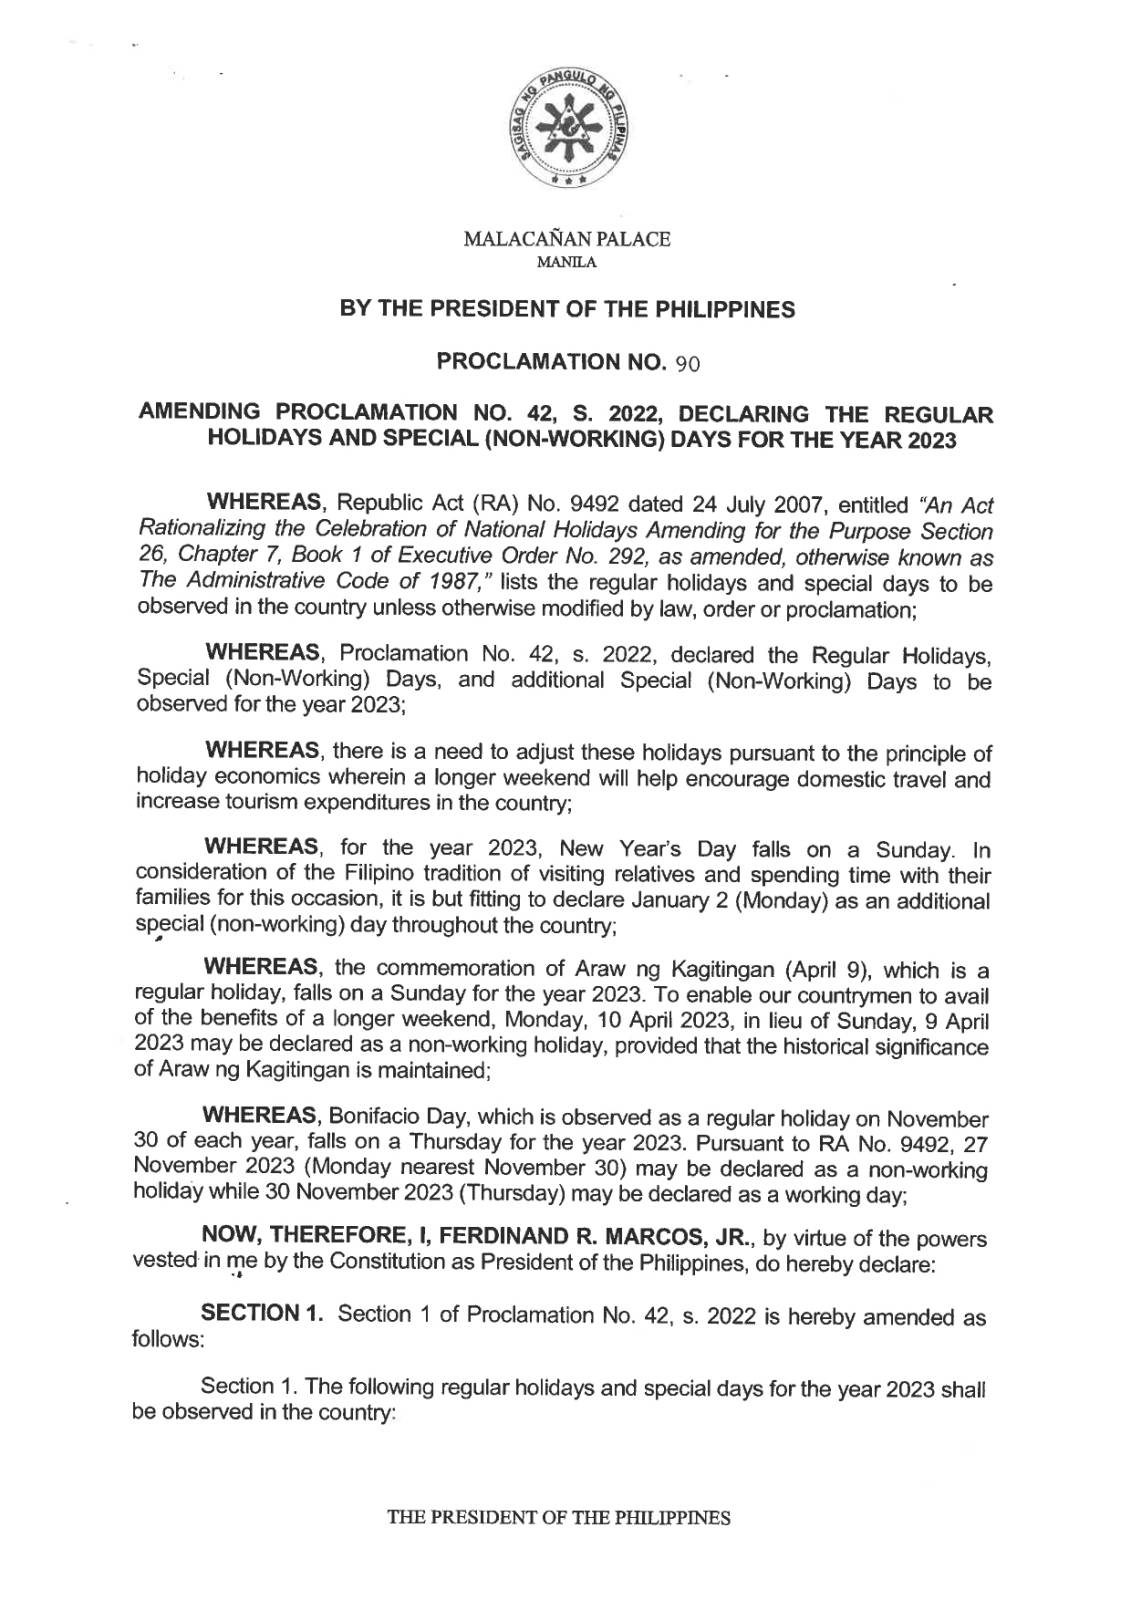 Palace updates list of holidays for 2023 with more long weekends